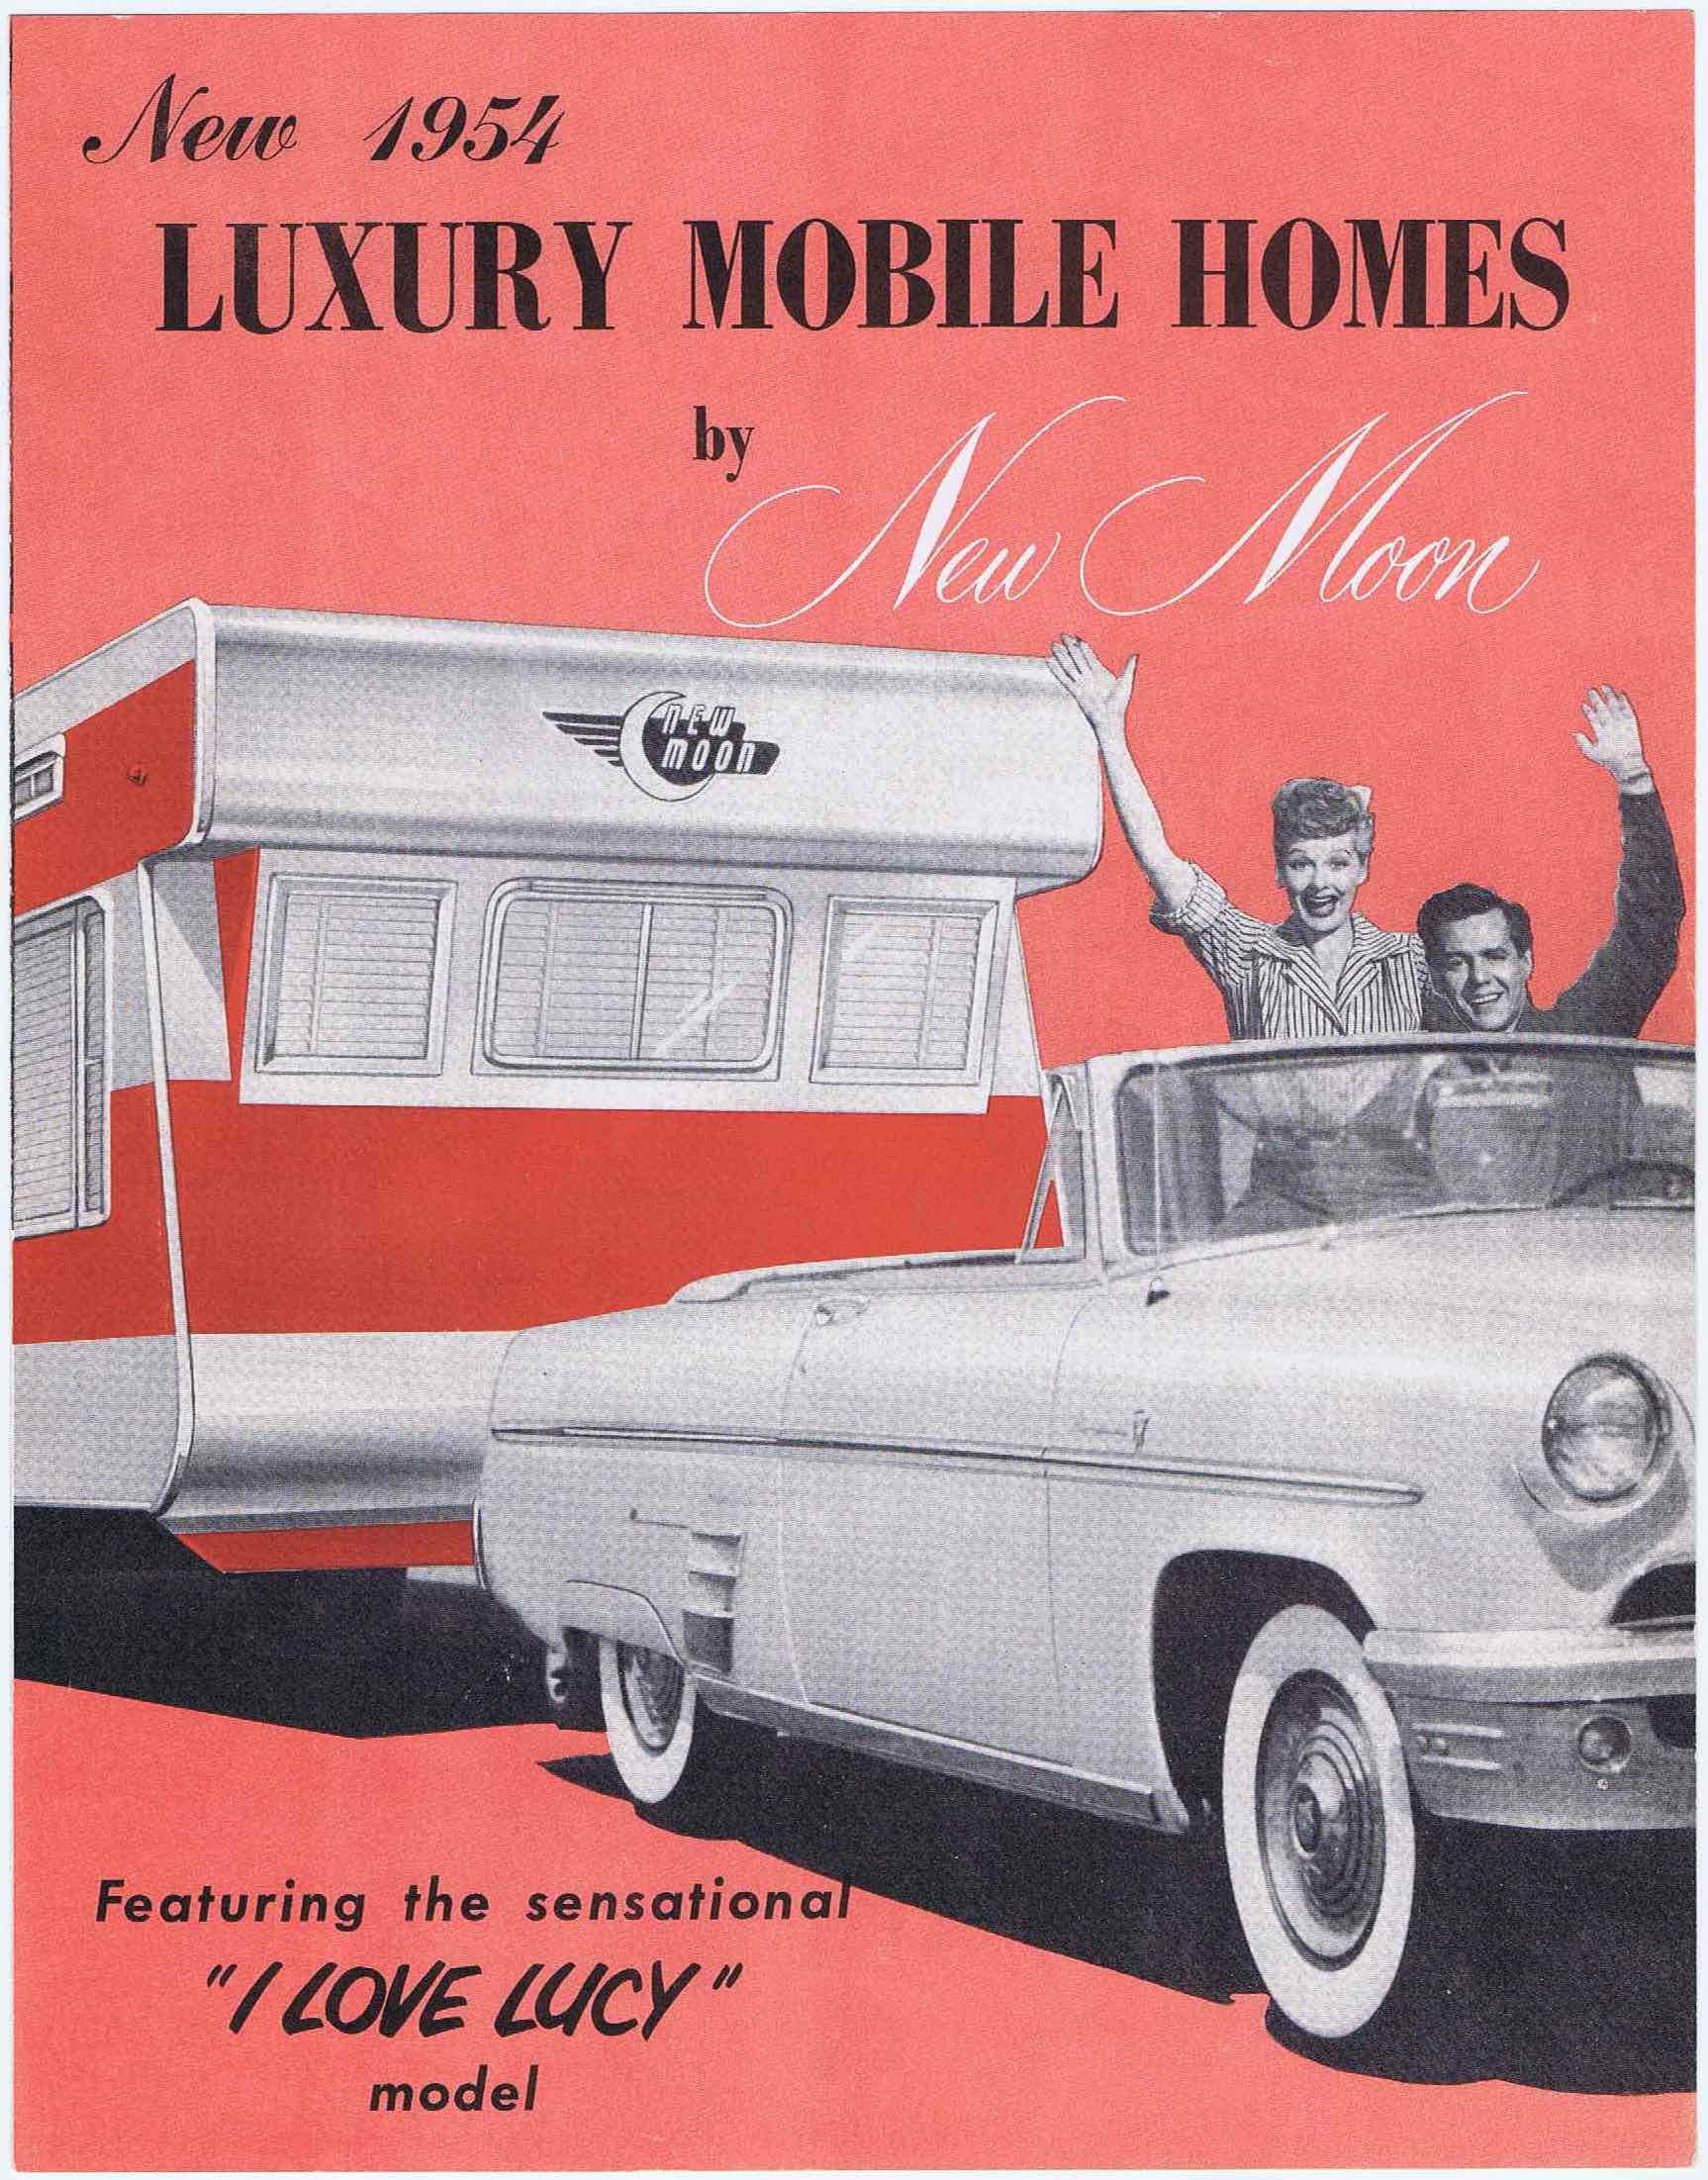 J328	NEW 1954 LUXURY MOBILE HOMES BY NEW MOON - FEATURING THE SENSATIONAL “I LOVE LUCY” MODEL